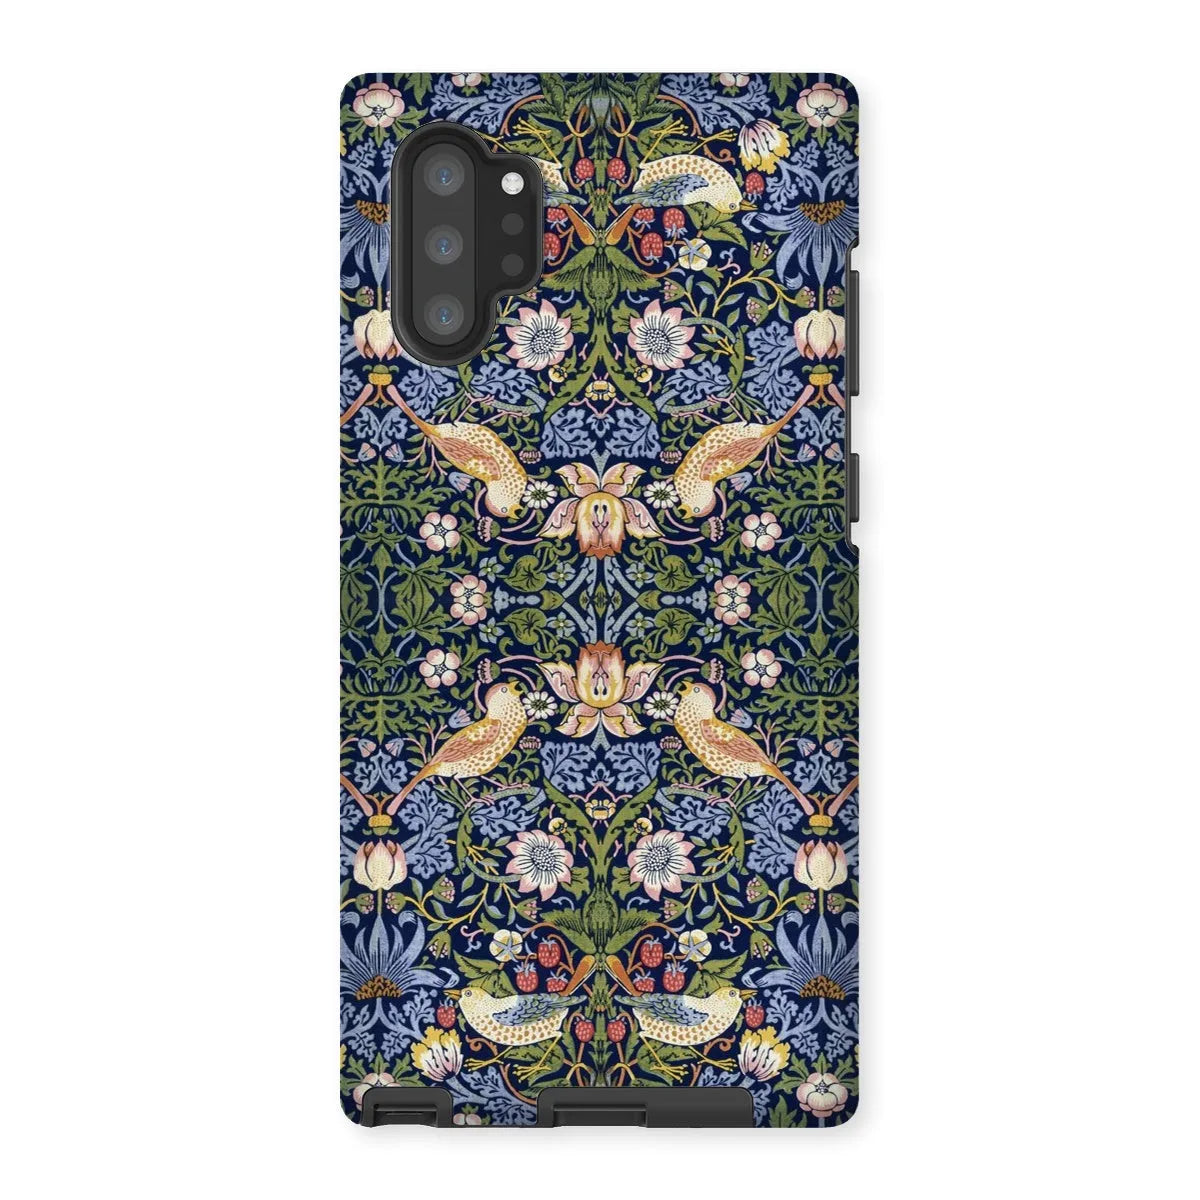 Strawberry Thief - Arts & Crafts Phone Case - William Morris - Samsung Galaxy Note 10p / Matte - Mobile Phone Cases